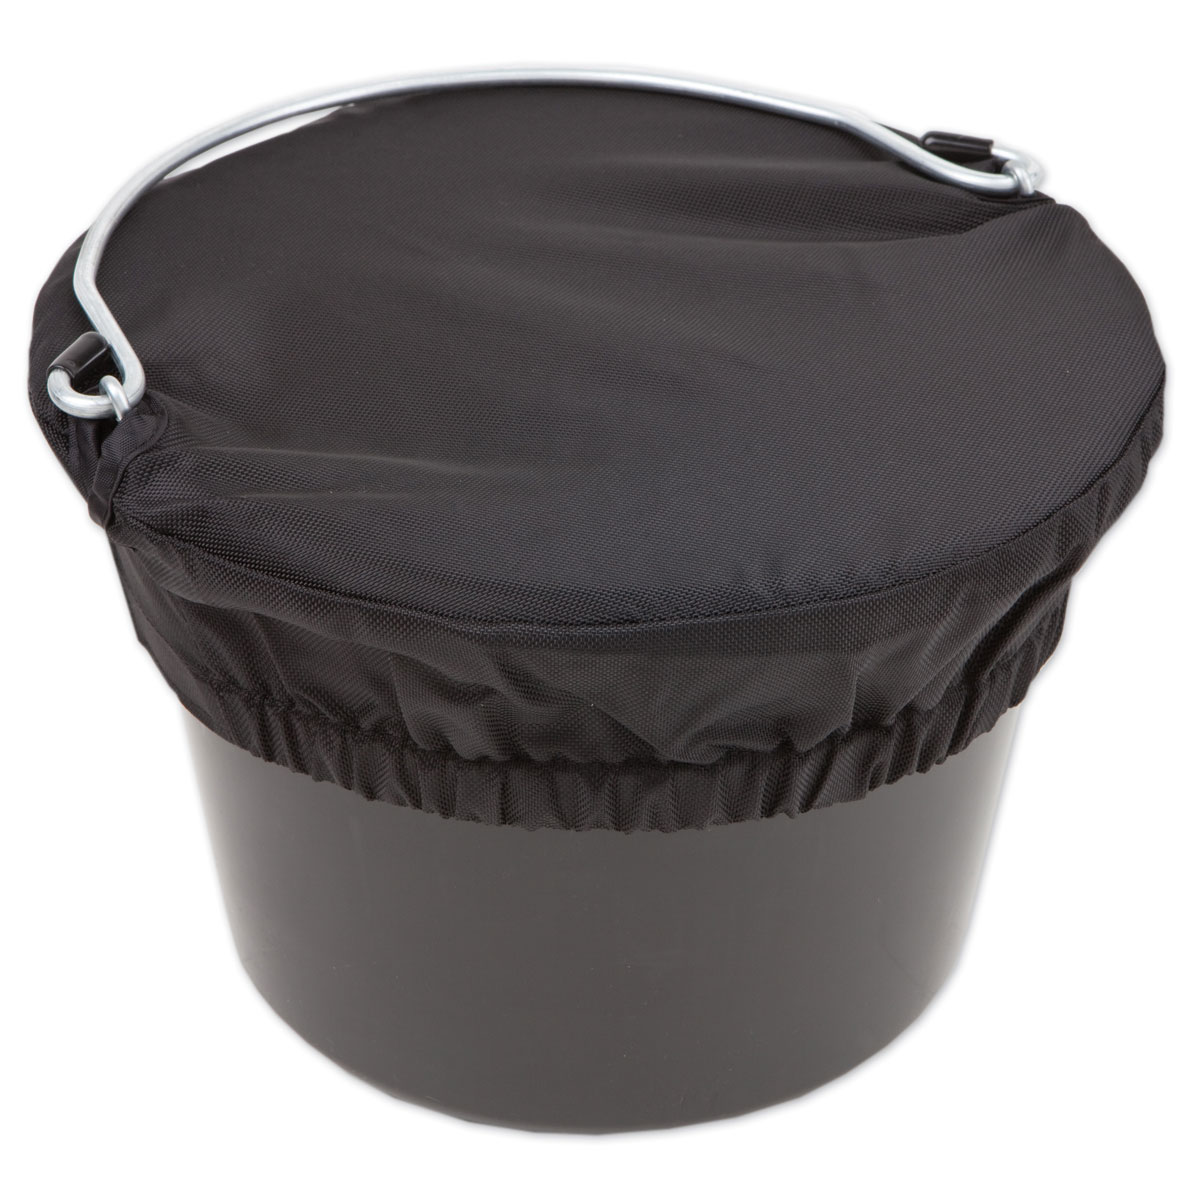 Trilanco Unisexs Bitz Water Bucket Cover Navy One Size